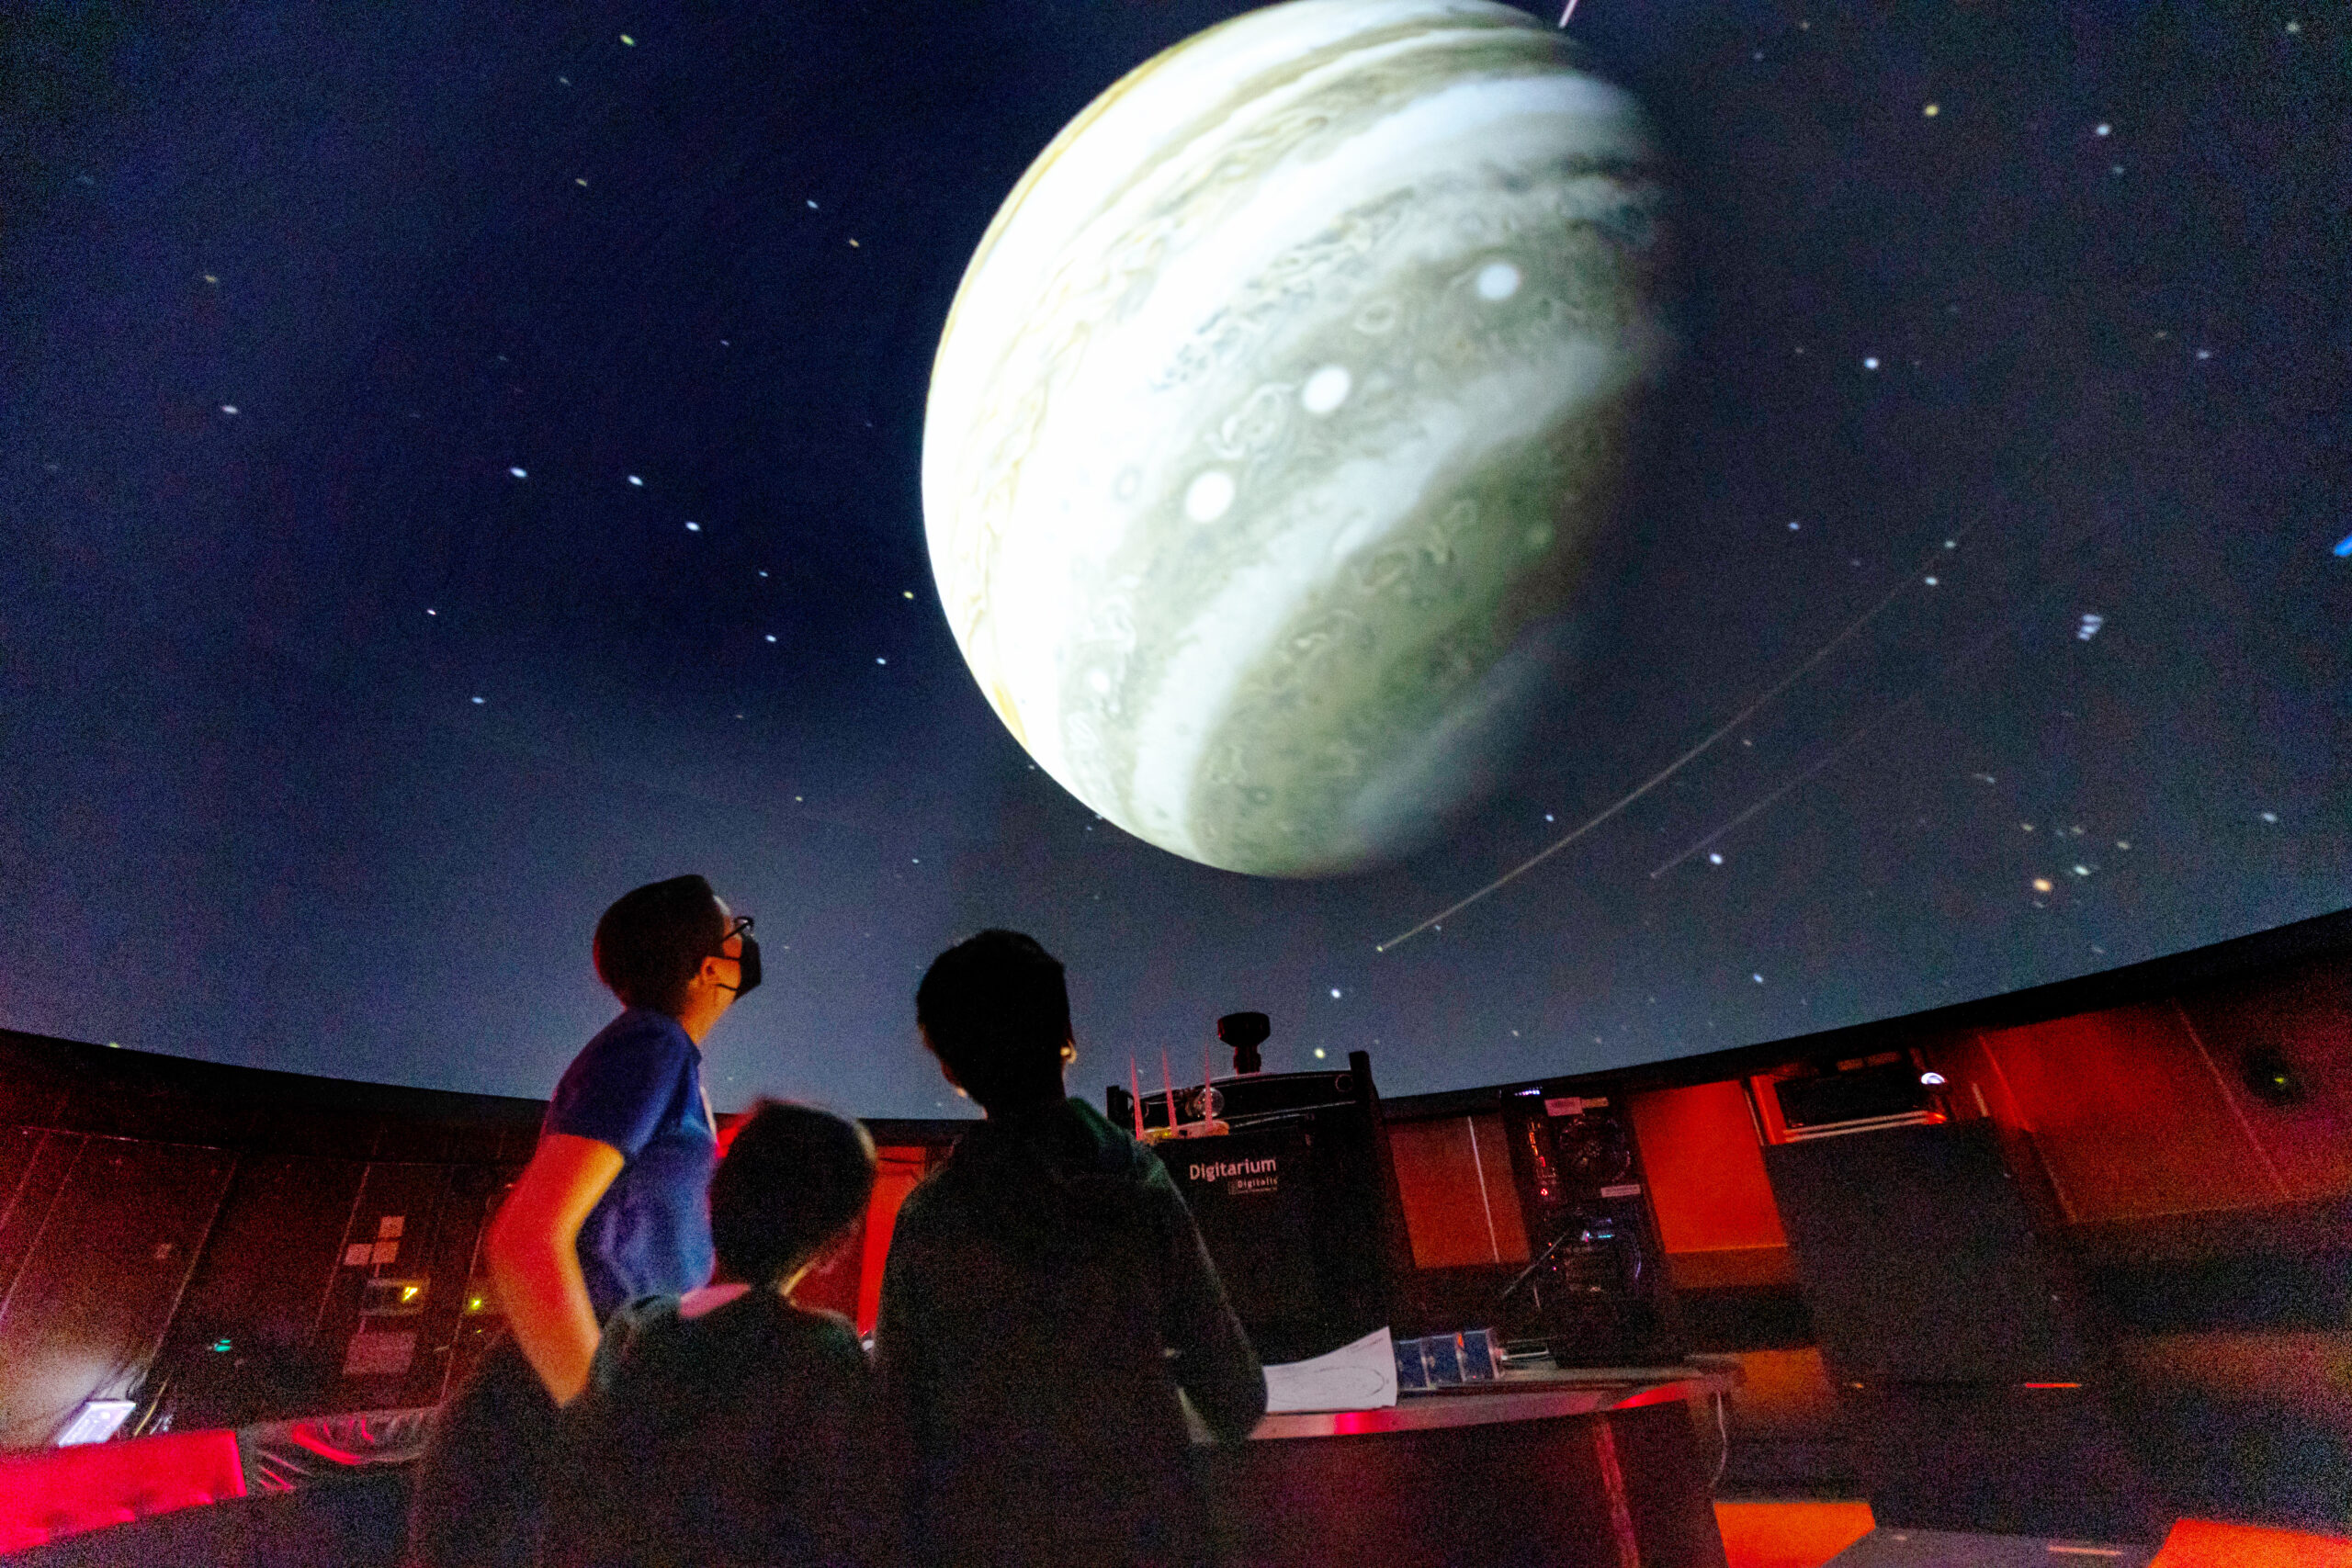 Inside view of the Planetarium with Lawrence staff and visitors. A large planet is shown on the dome.